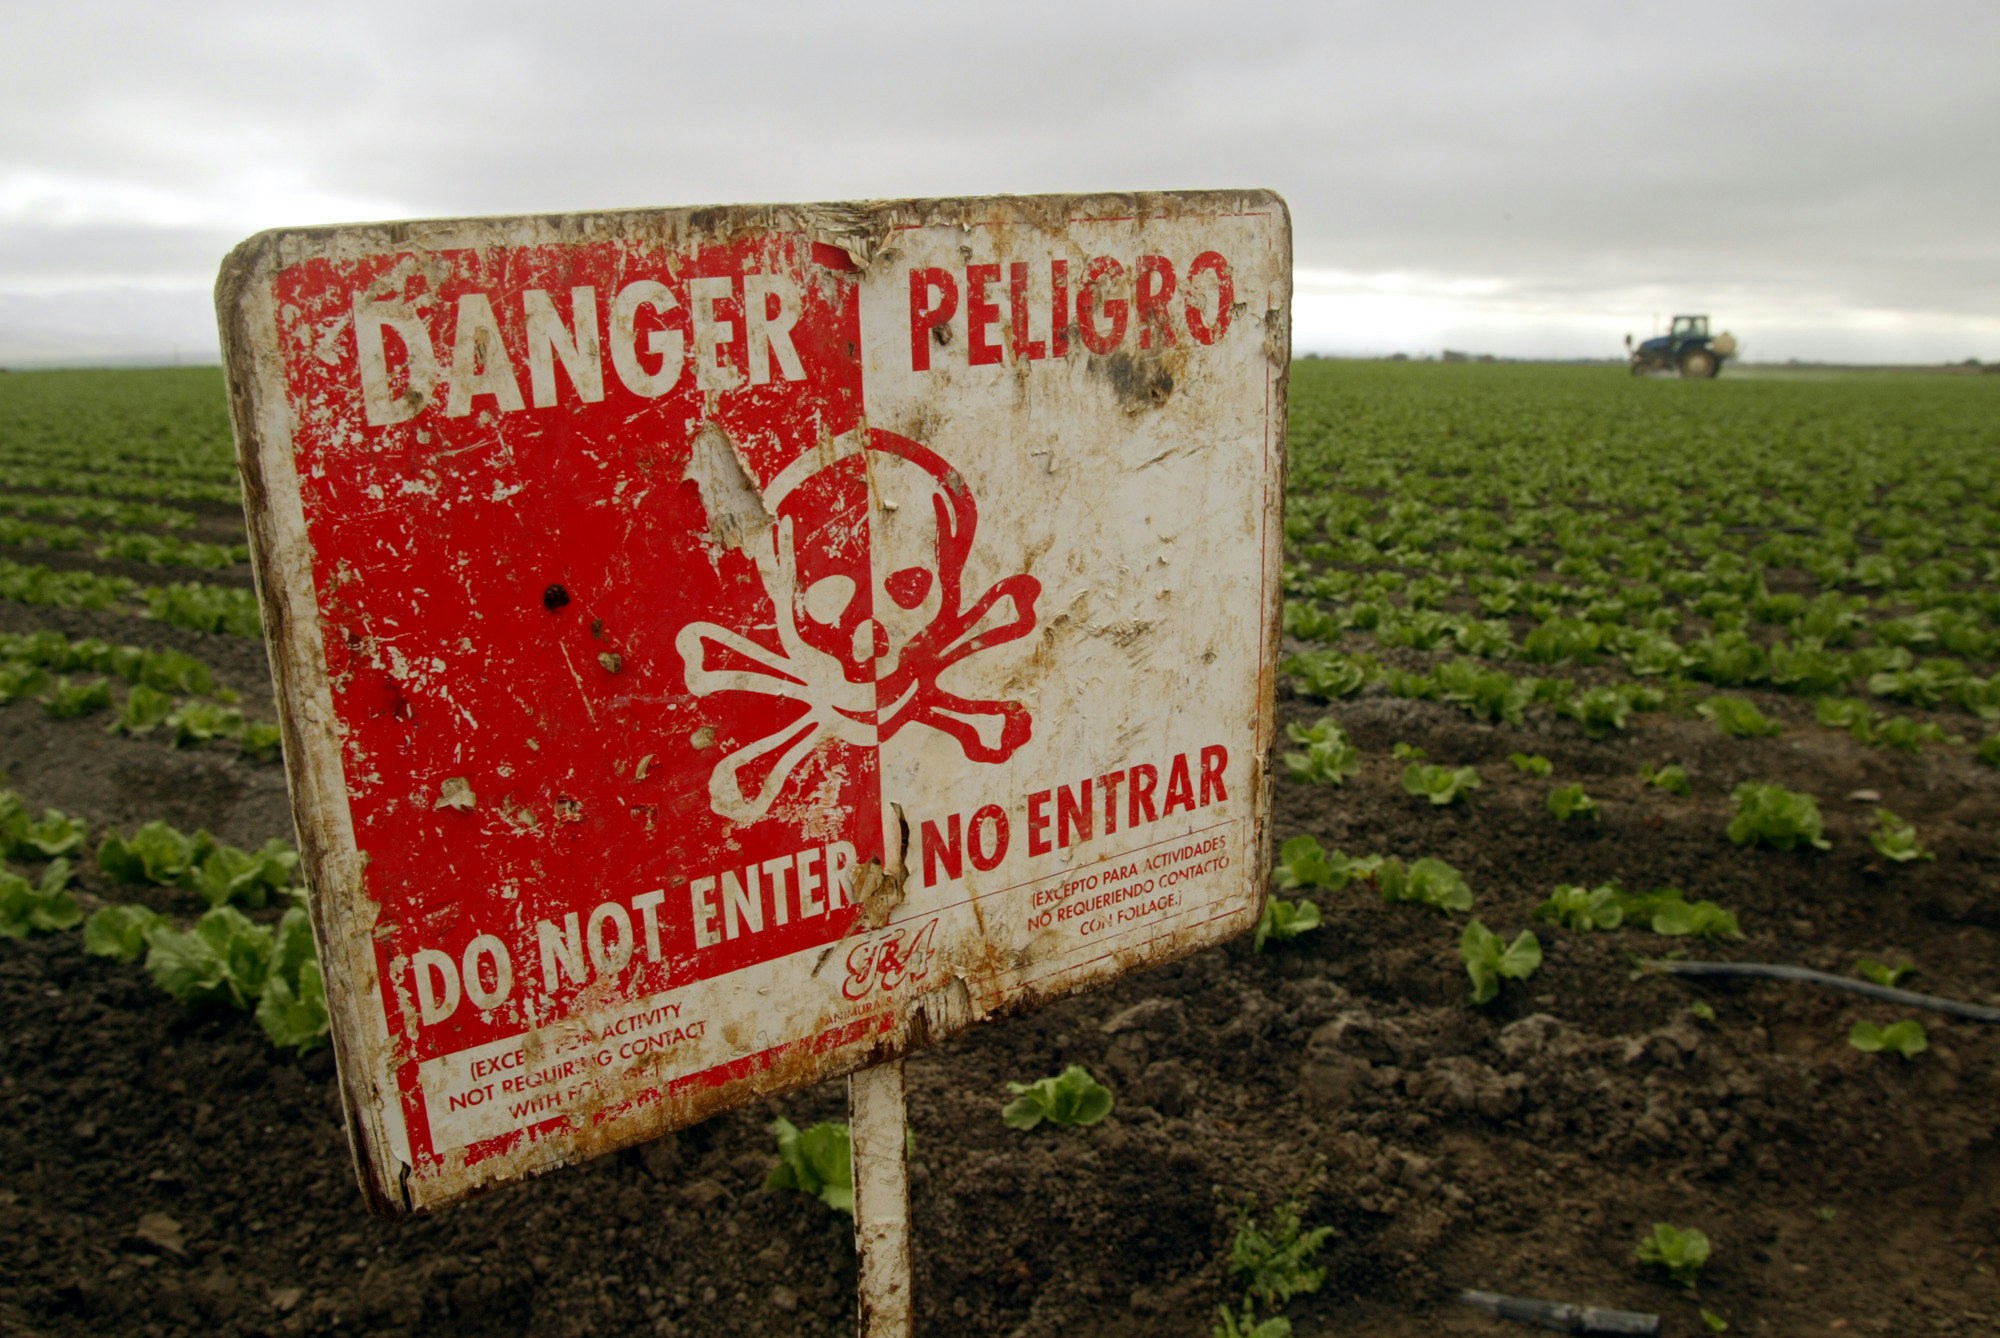 A "Do Not Enter" sign marks a field of head cabbage during the spraying of pesticides near Chualar, Calif., Monday, Sept. 16, 2002.  State reports of pesticide poisonings among farmworkers are declining, but labor advocates say that tougher state laws and more enforcement are needed to adequately protect the people picking and packing crops. (AP Photo/Mike Fiala)